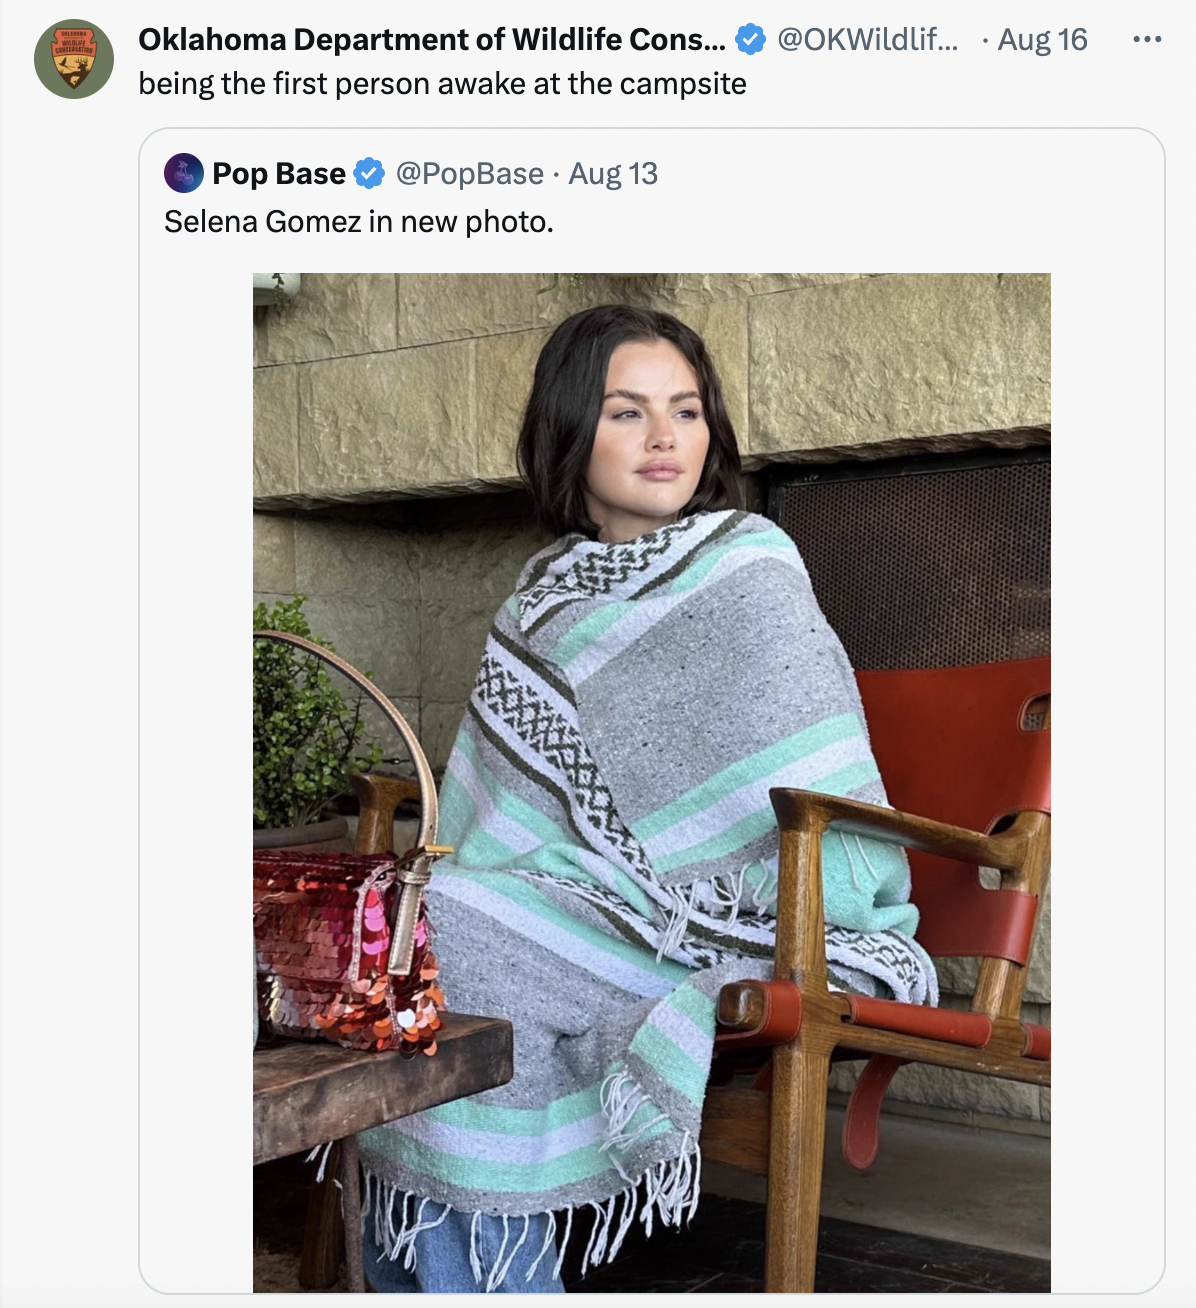 selena gomez in a blanket - stole - 3 Oklahoma Department of Wildlife Cons... being the first person awake at the campsite Pop Base Aug 13 Selena Gomez in new photo. .... Aug 16